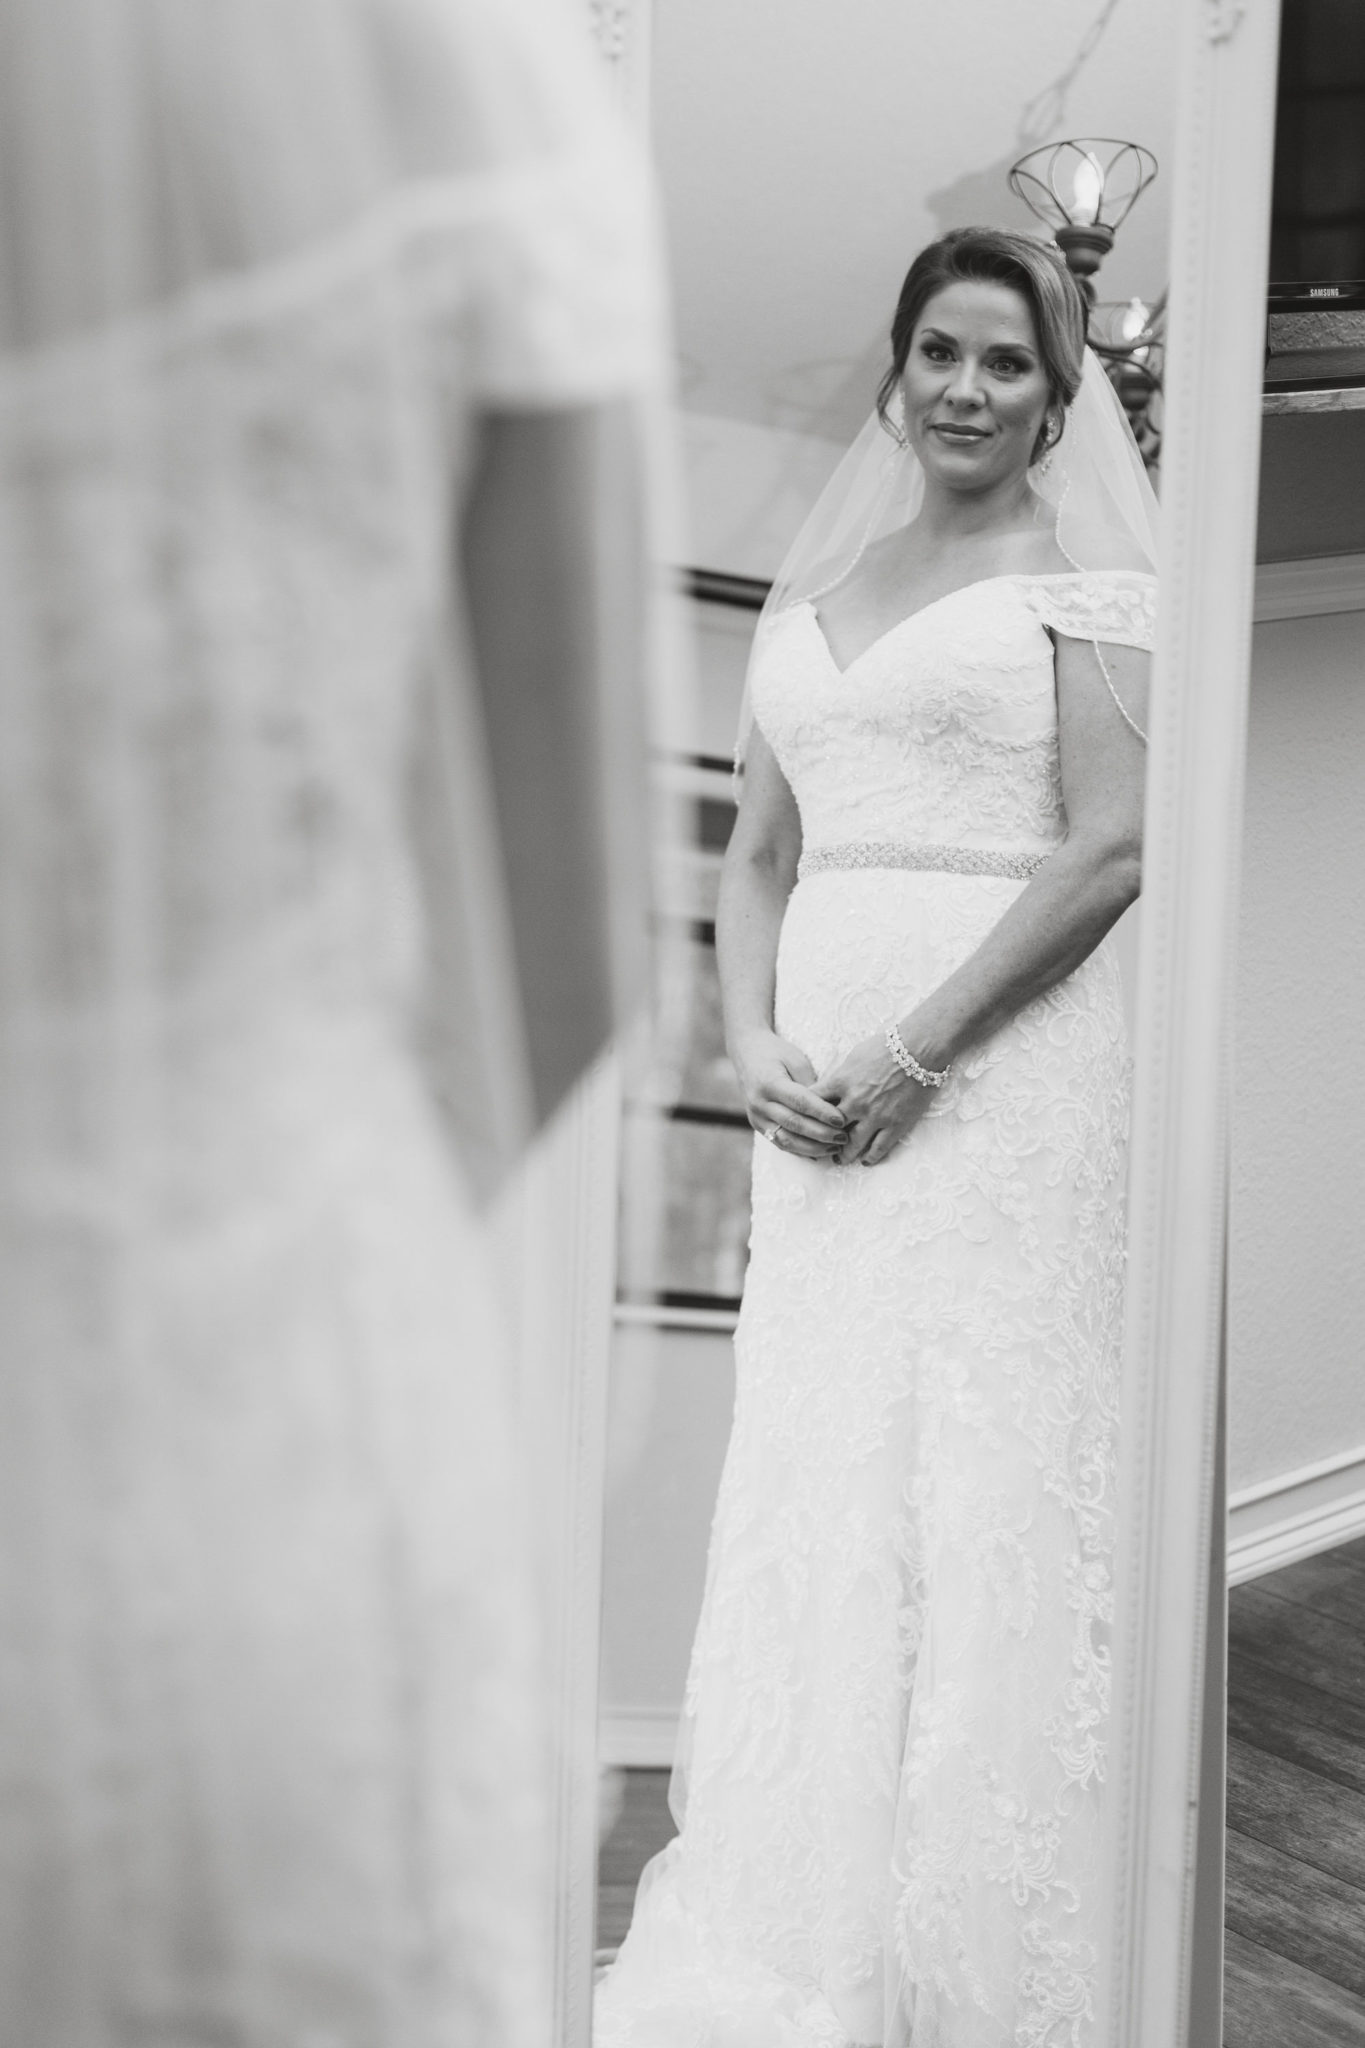 Bride looking at her reflection in the mirror.